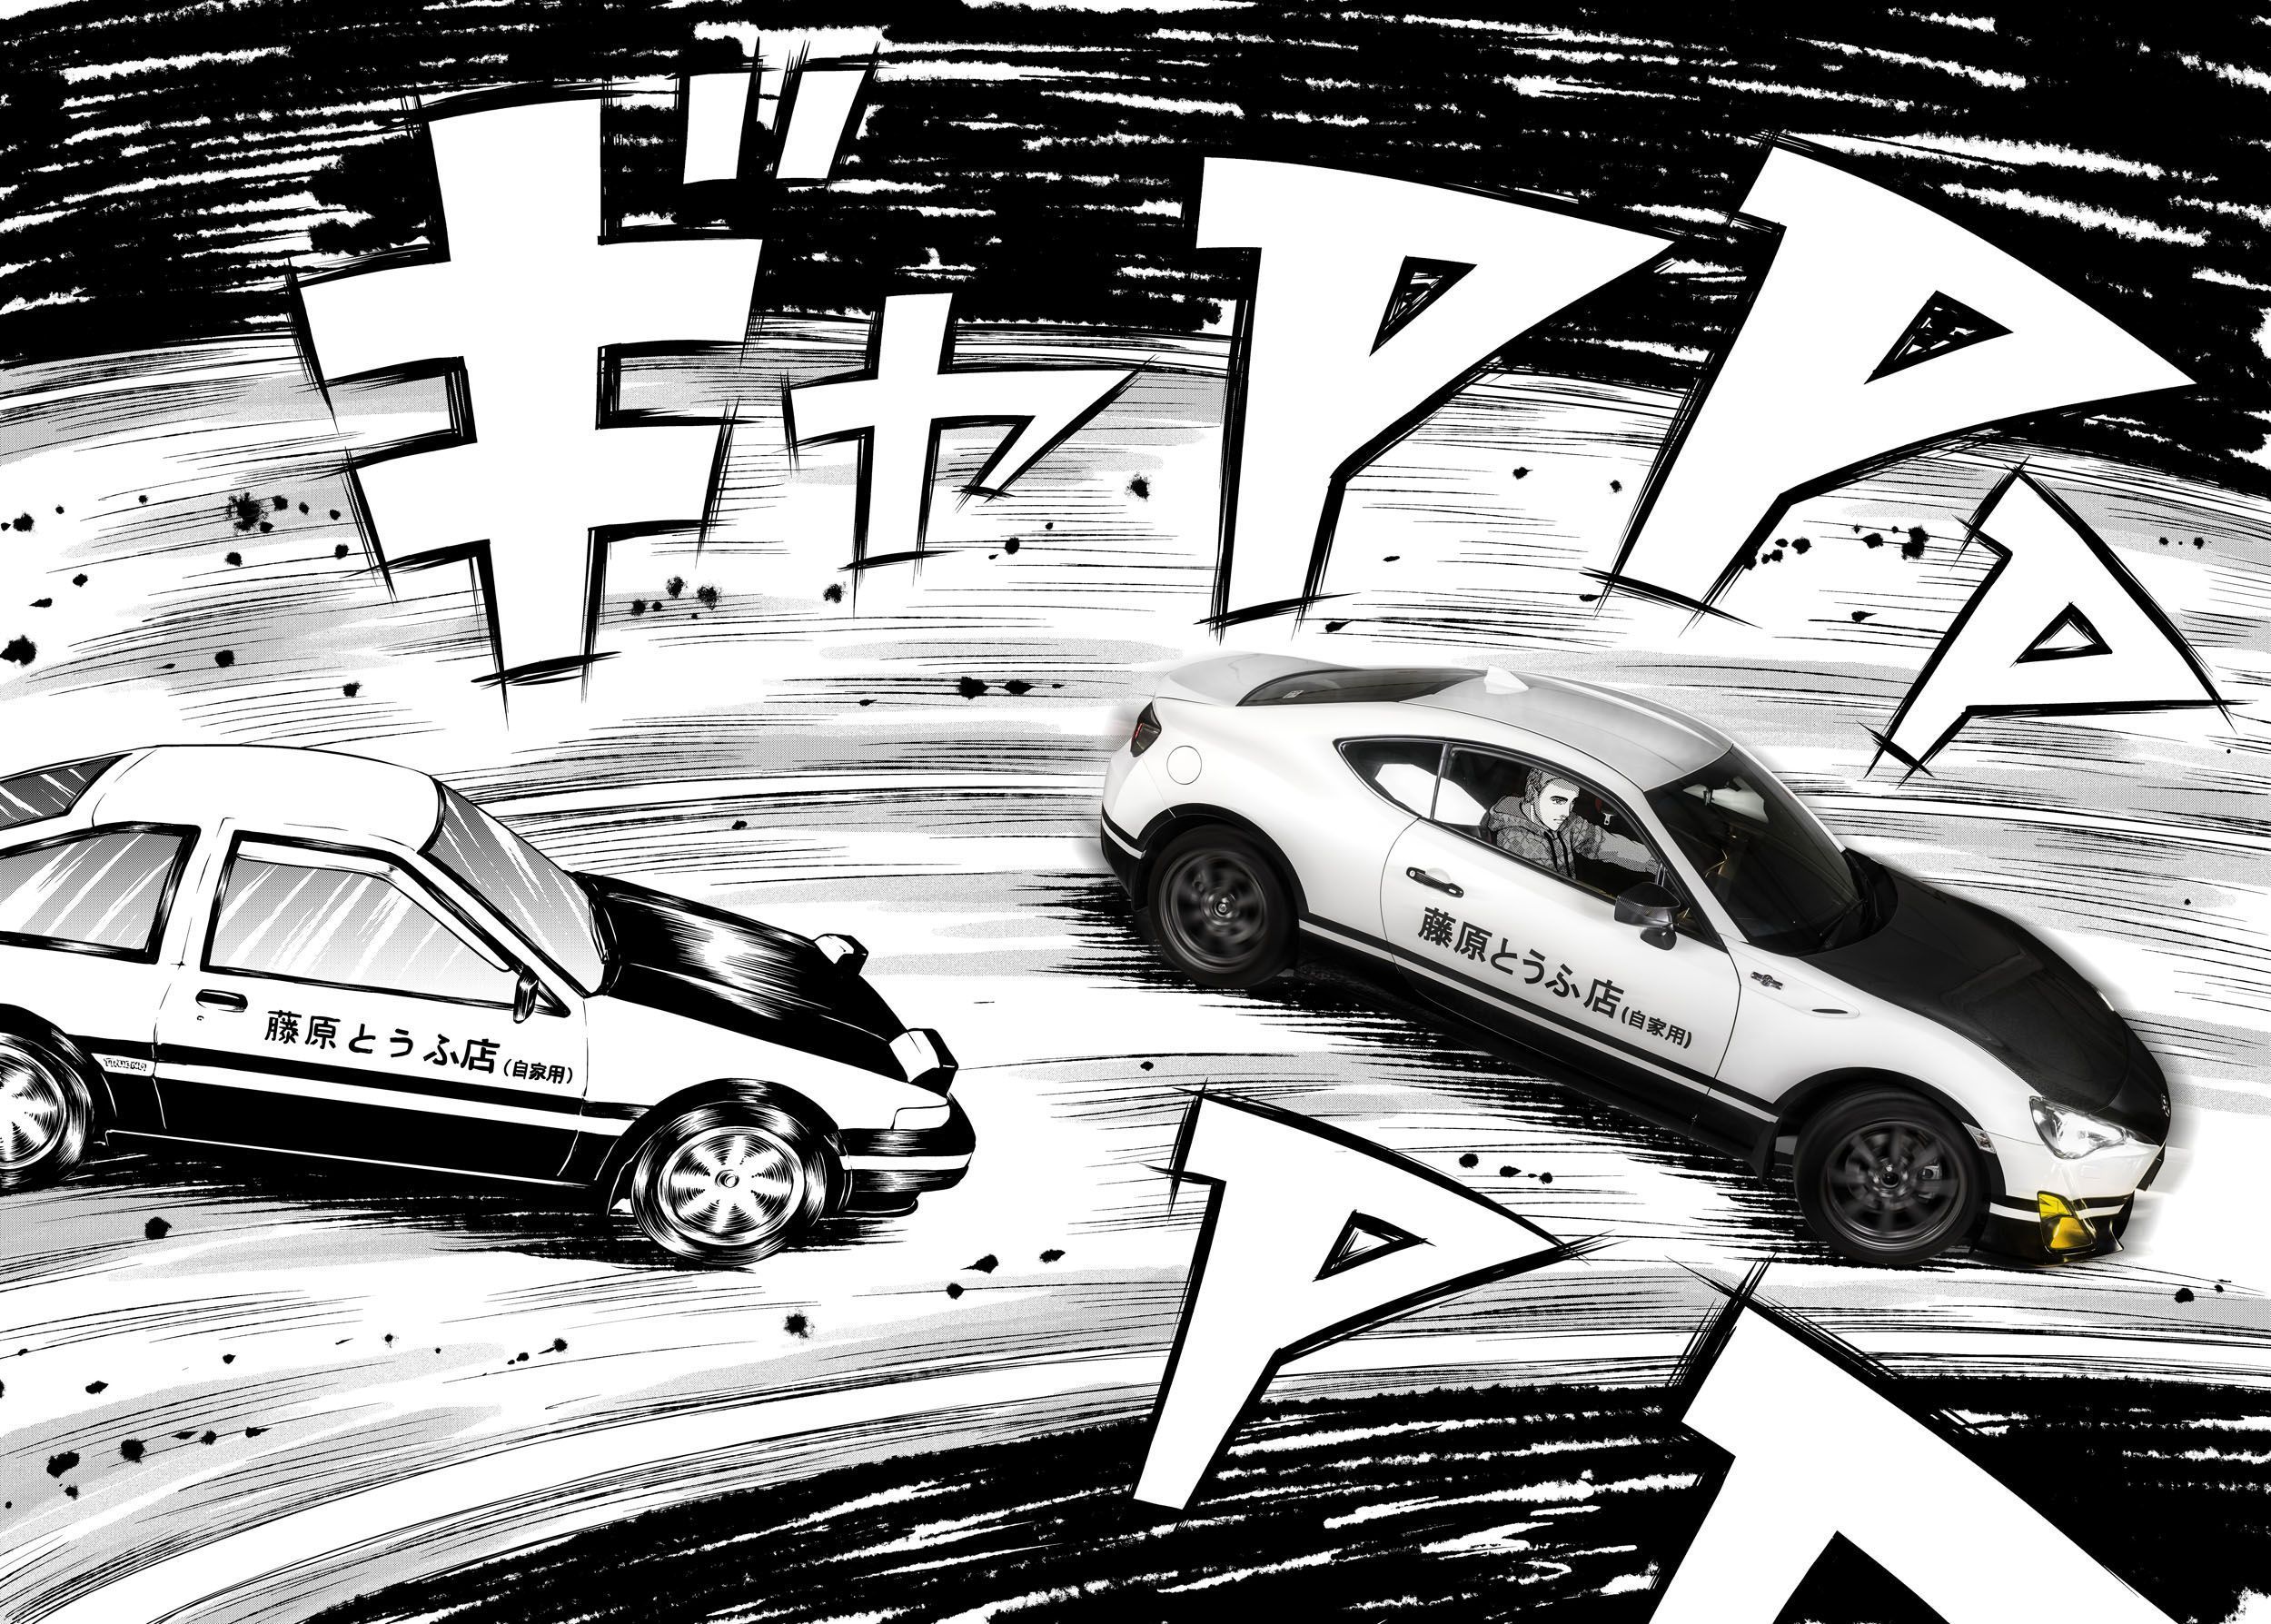 Toyota Adopts Manga Style With Initial D Inspired GT86